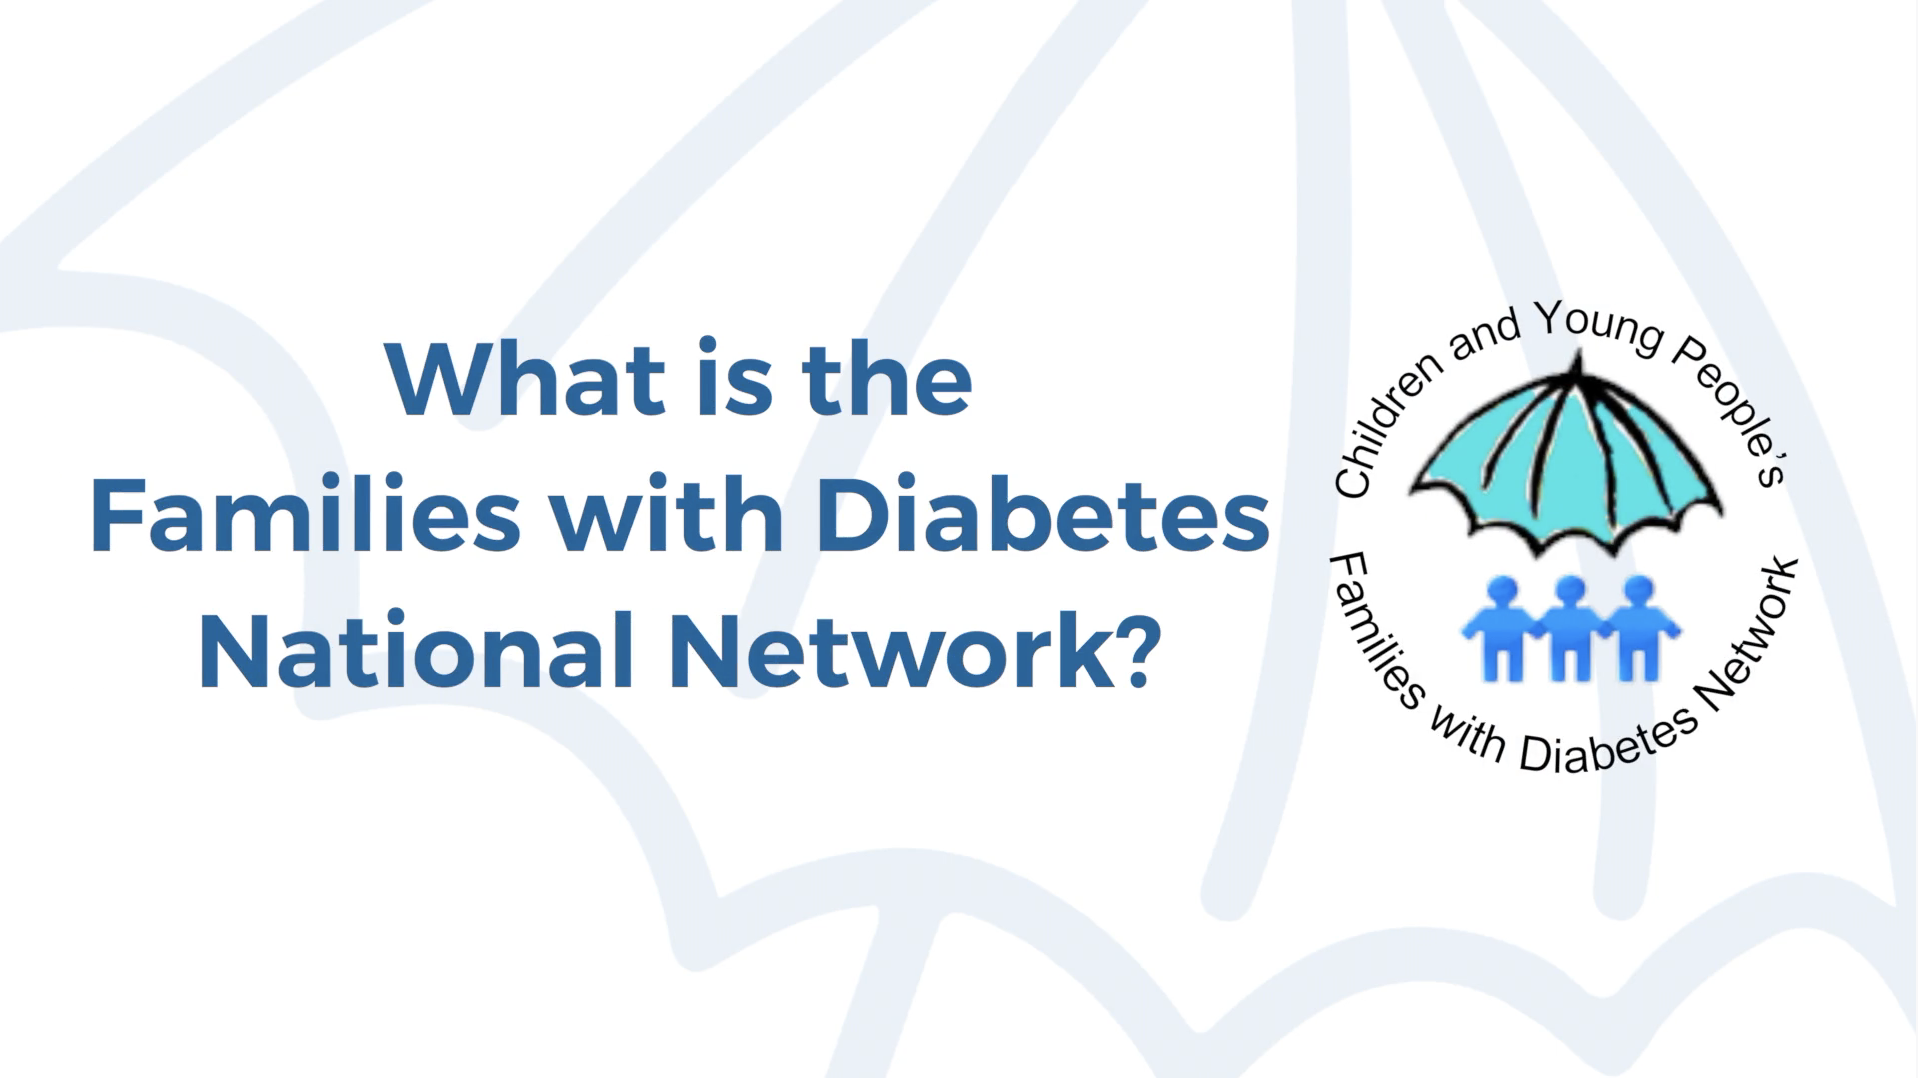 The Families with Diabetes National Network